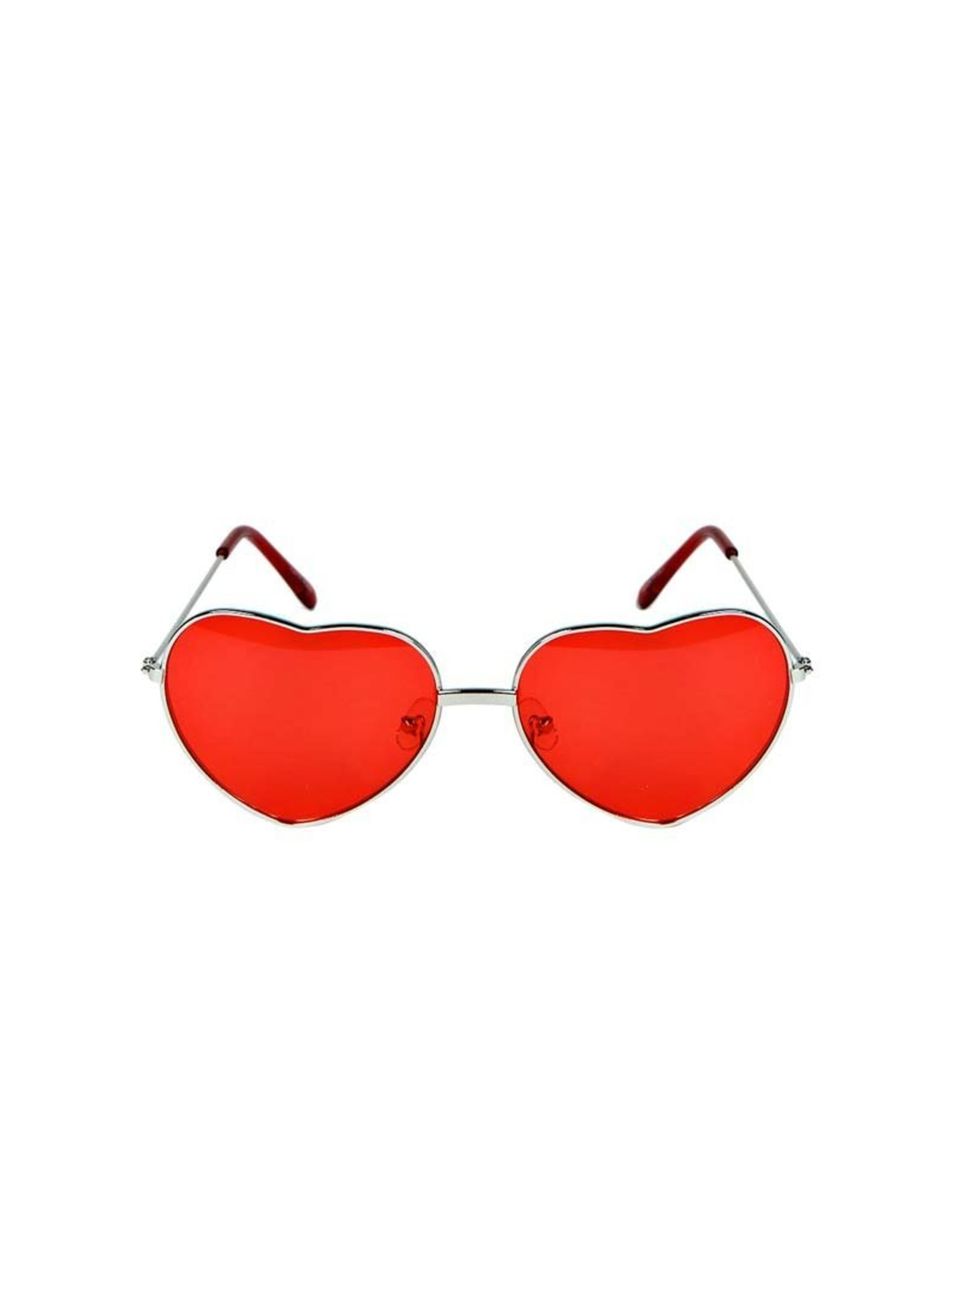 <p>Need festival fashion inspiration? Take a leaf out of Fashion Assistant Molly Haylor's book and stock up on statement sunnies. </p><p><a href="http://www.boohoo.com/restofworld/accessories/icat/accessories">Boohoo</a> sunglasses, £6</p>